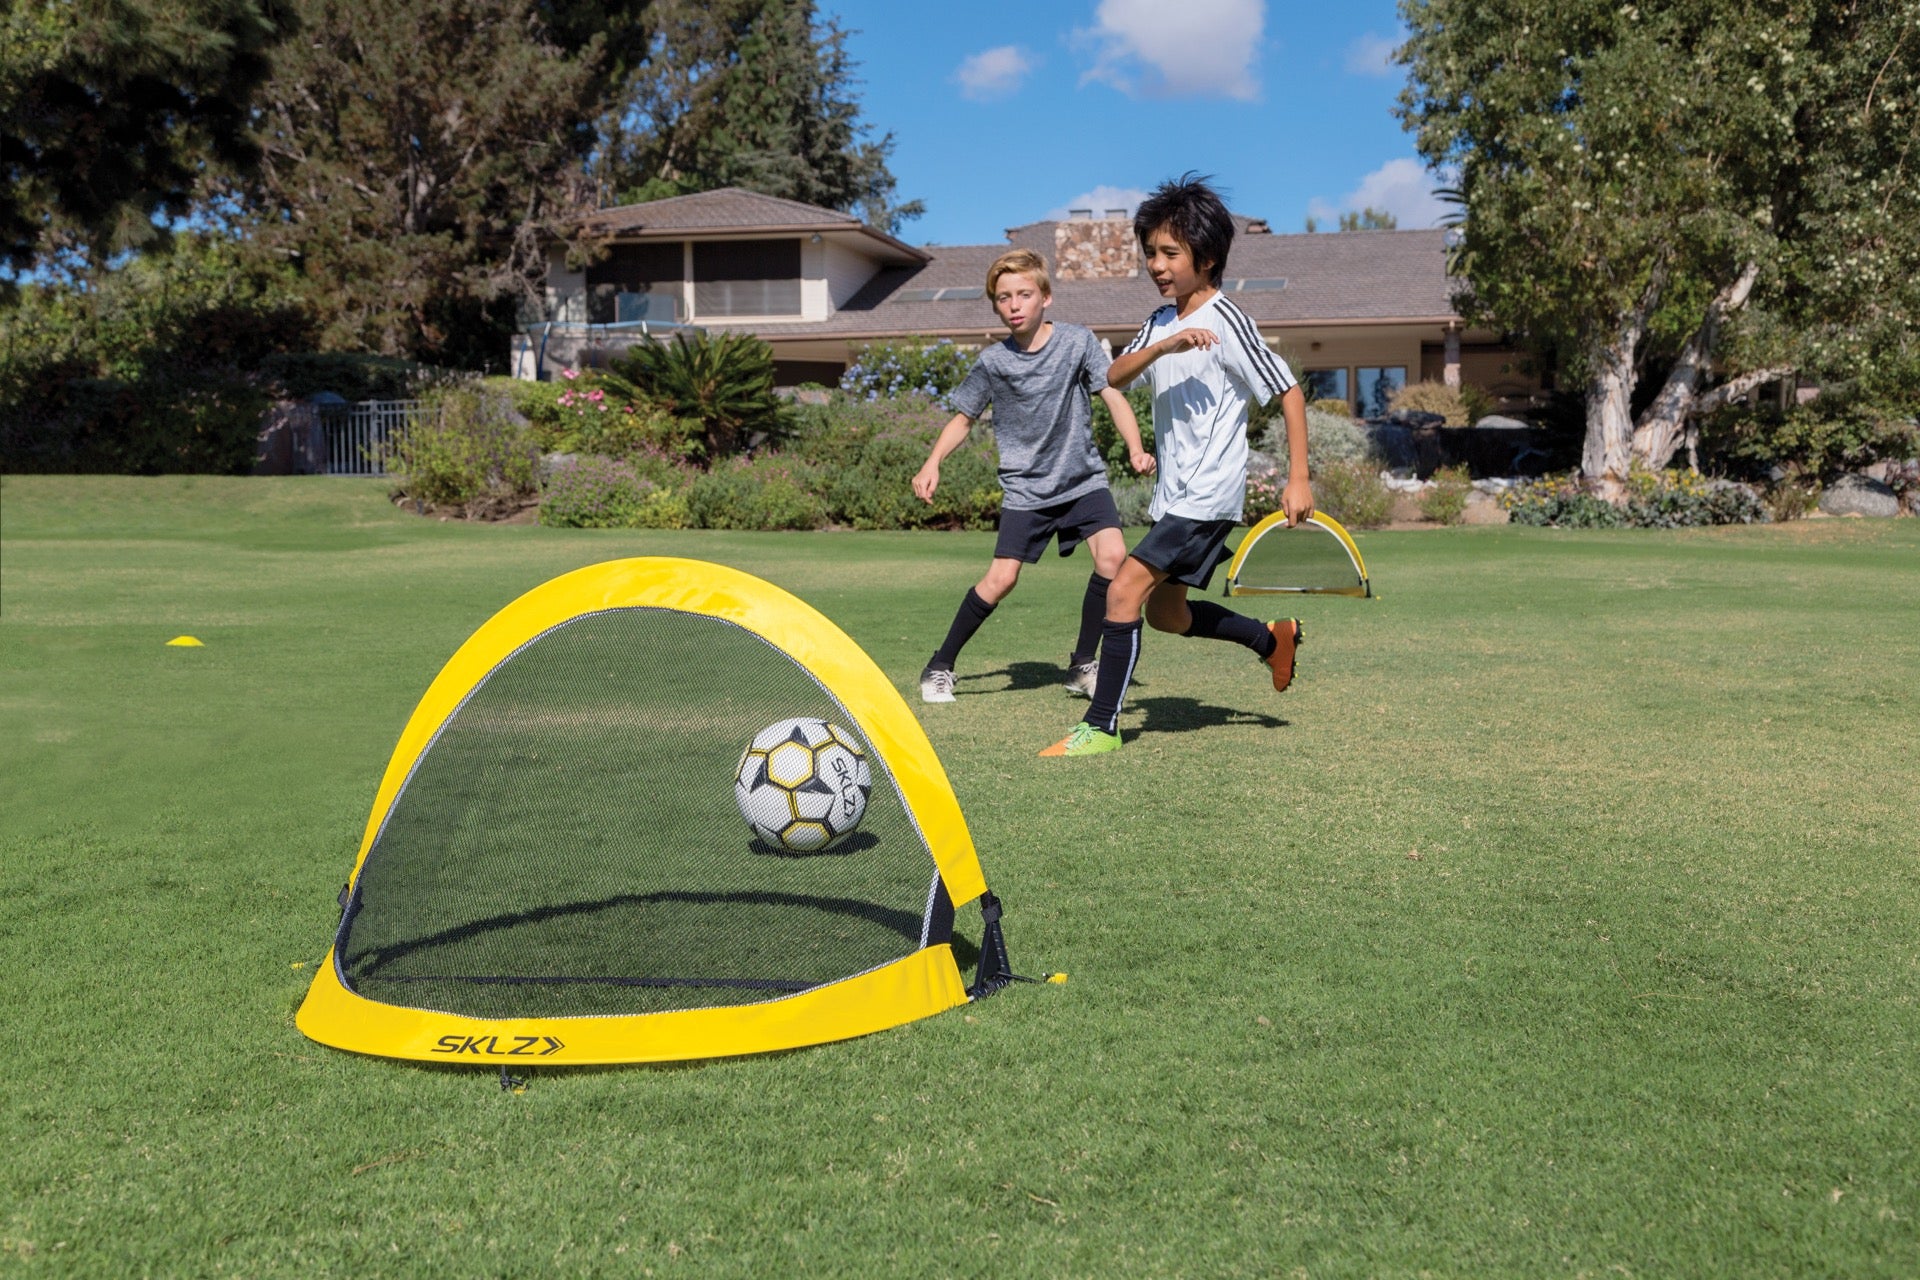 SKLZ Playmaker Goal Set - Buy now online with Free delivery in 1-2 days in UAE, Dubai, Abu-Dhabi.